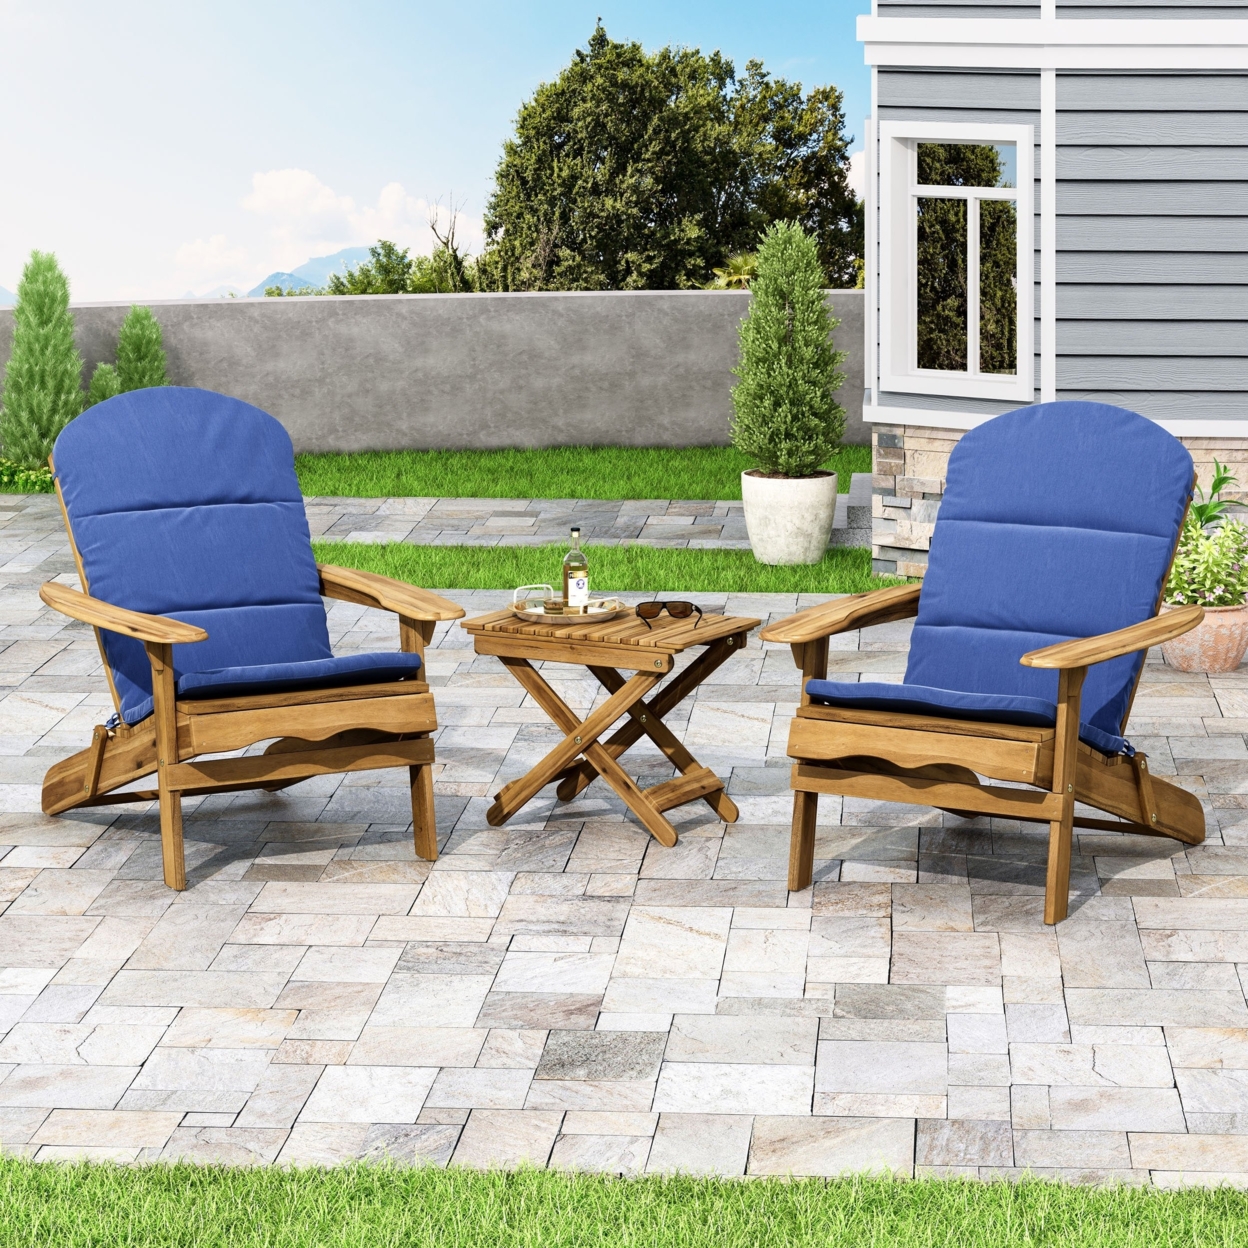 Reed Outdoor 2 Seater Acacia Wood Chat Set With Water Resistant Cushions - Natural/navy Blue